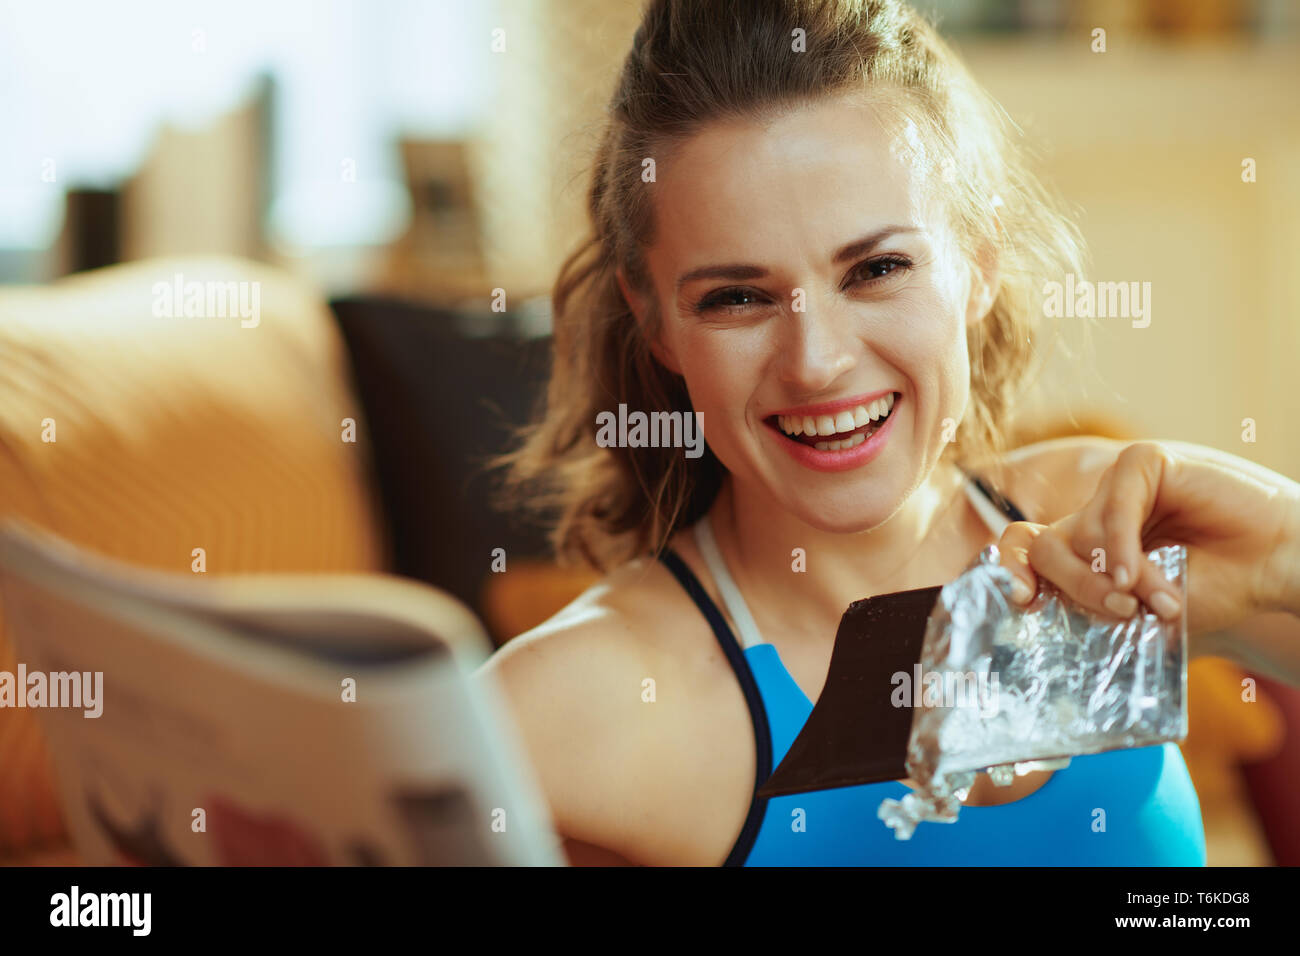 Portrait of happy fit sports woman in sport clothes in the modern house reading magazine and eating chocolate. Stock Photo